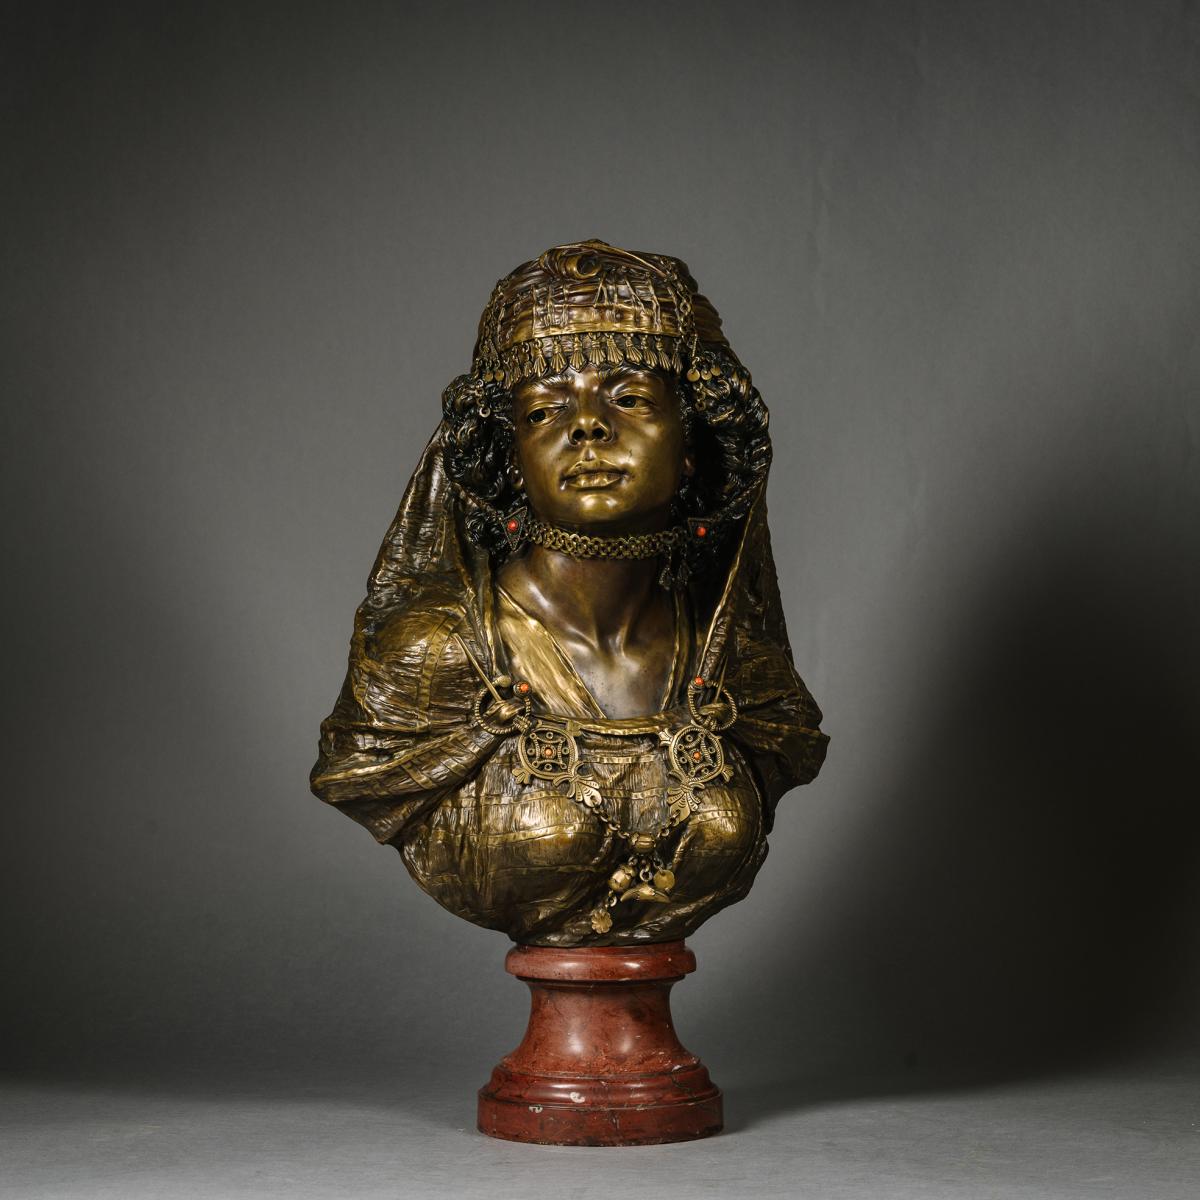 A Fine Orientalist Bust of A Young Woman